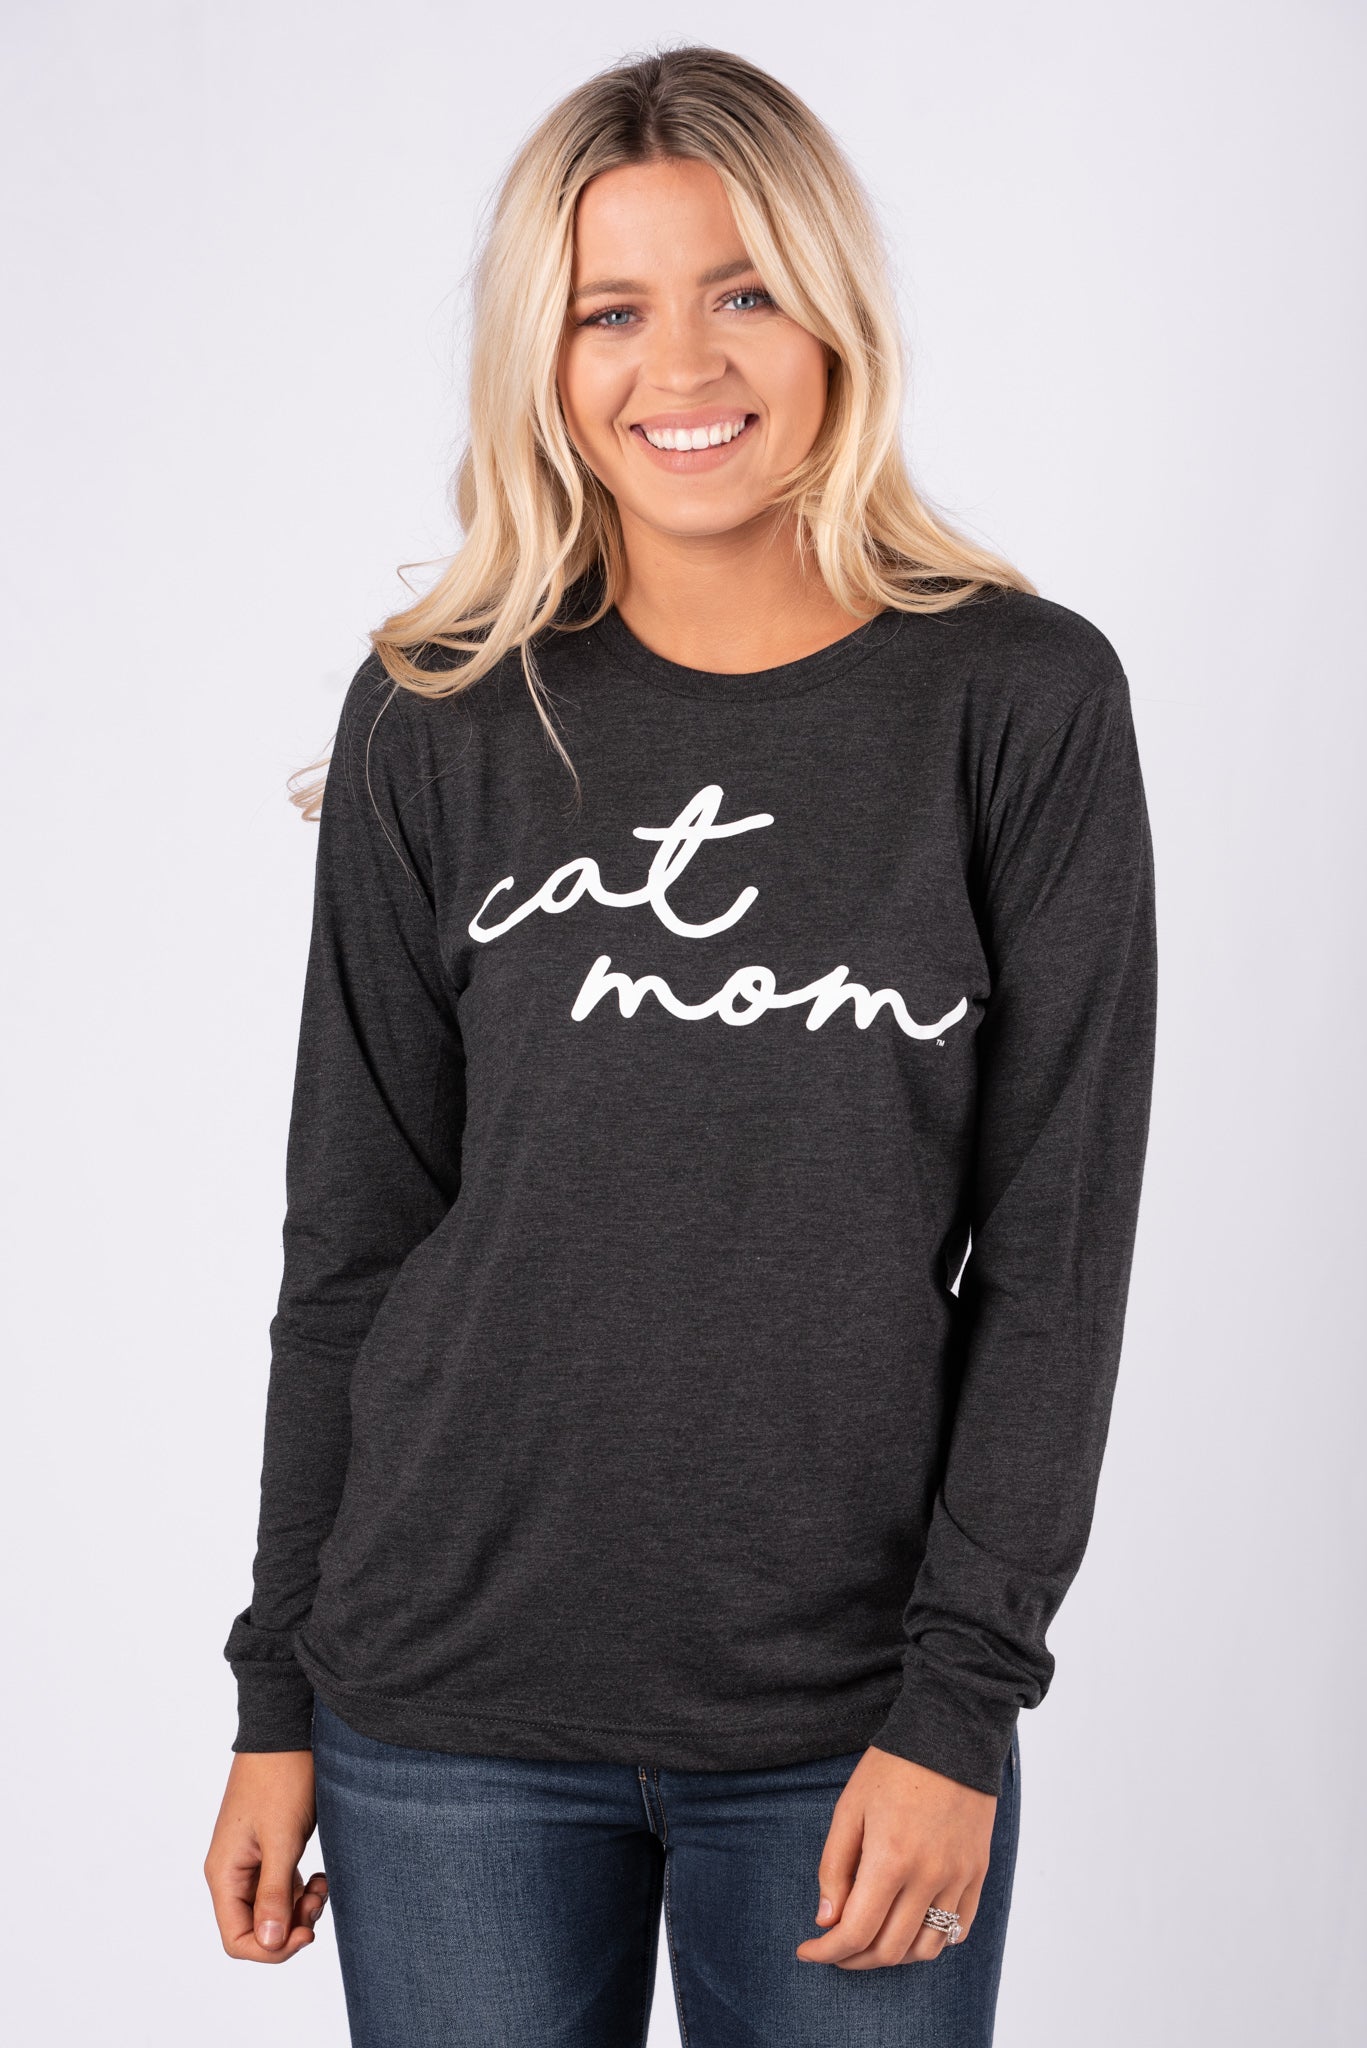 Cat Mom large pride script unisex long sleeve t-shirt charcoal - Cute T-shirts - Funny T-Shirts at Lush Fashion Lounge Boutique in Oklahoma City